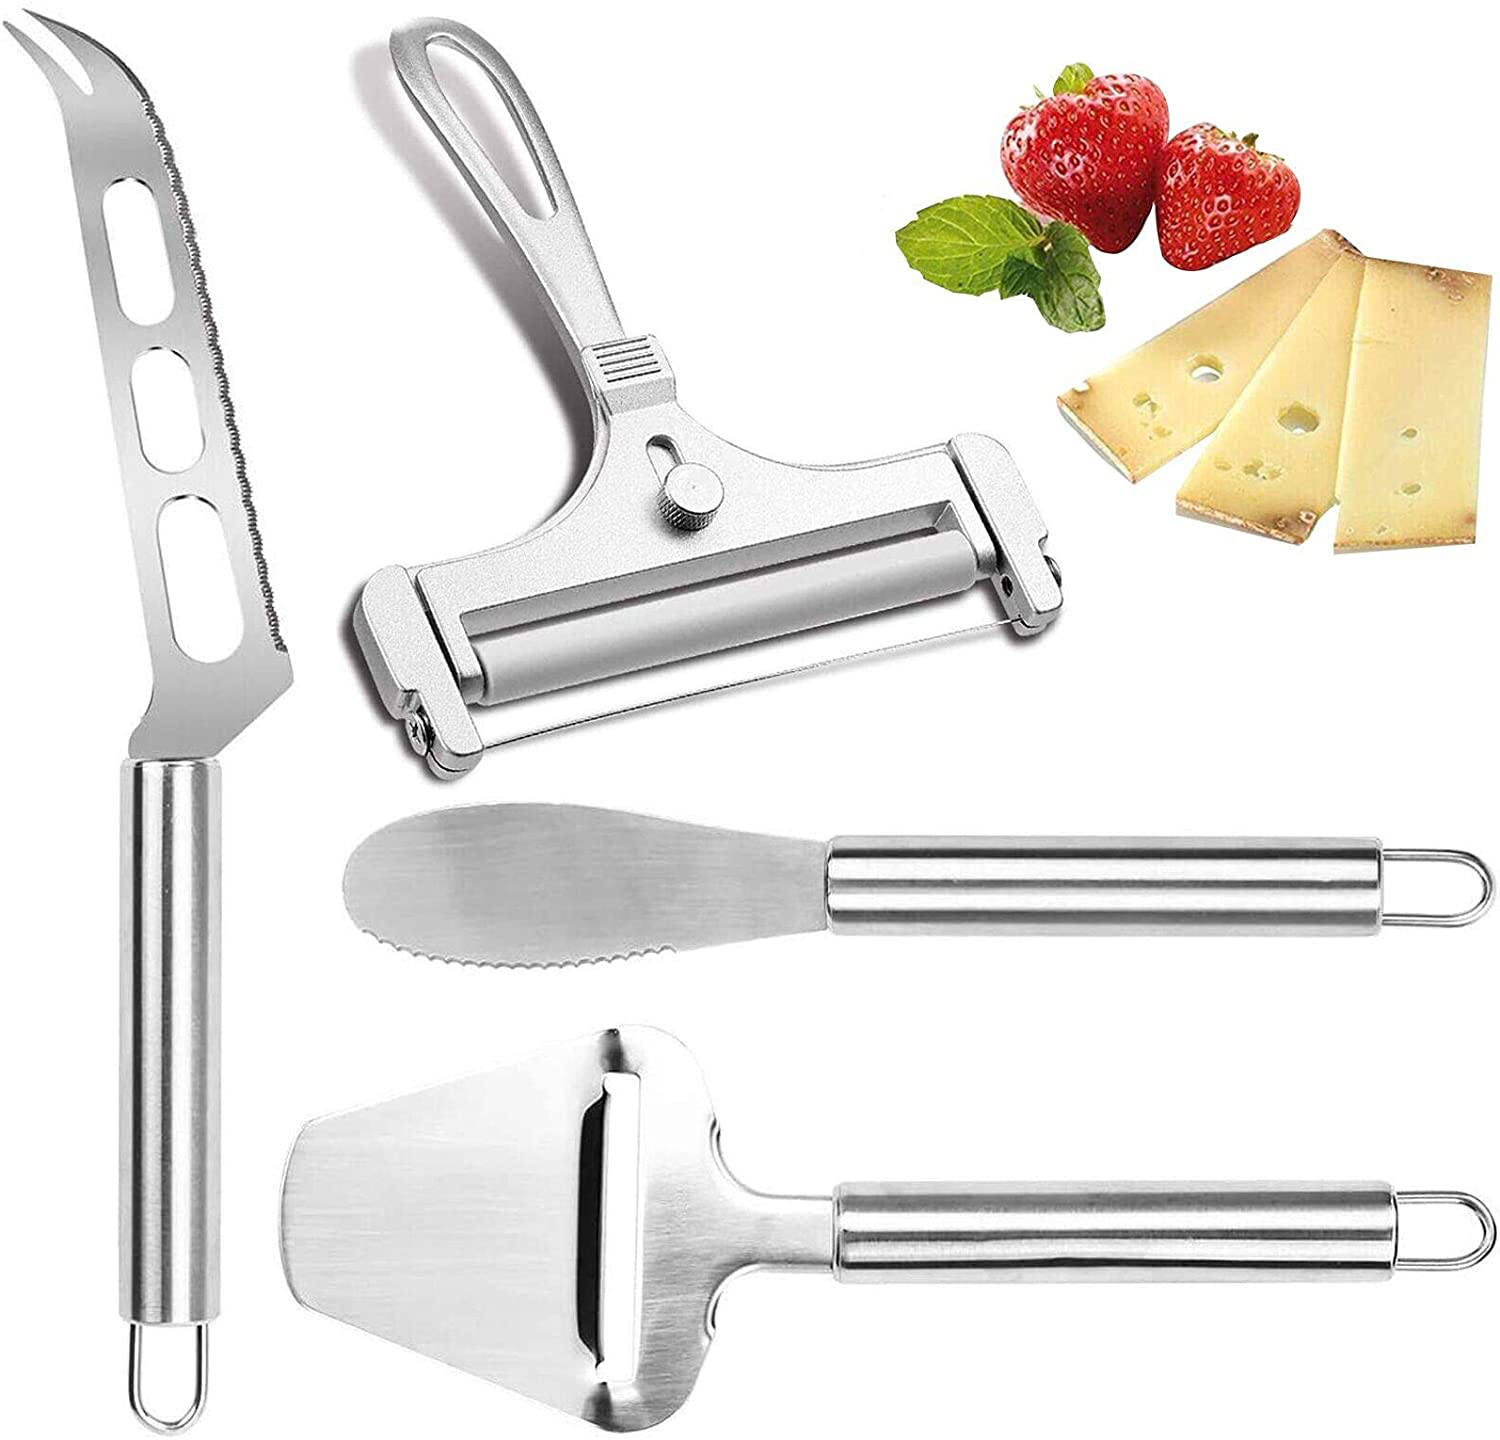 Cheese Knives with Wood Handle Steel Stainless Cheese Slicer Cheese Cutter (Option A)